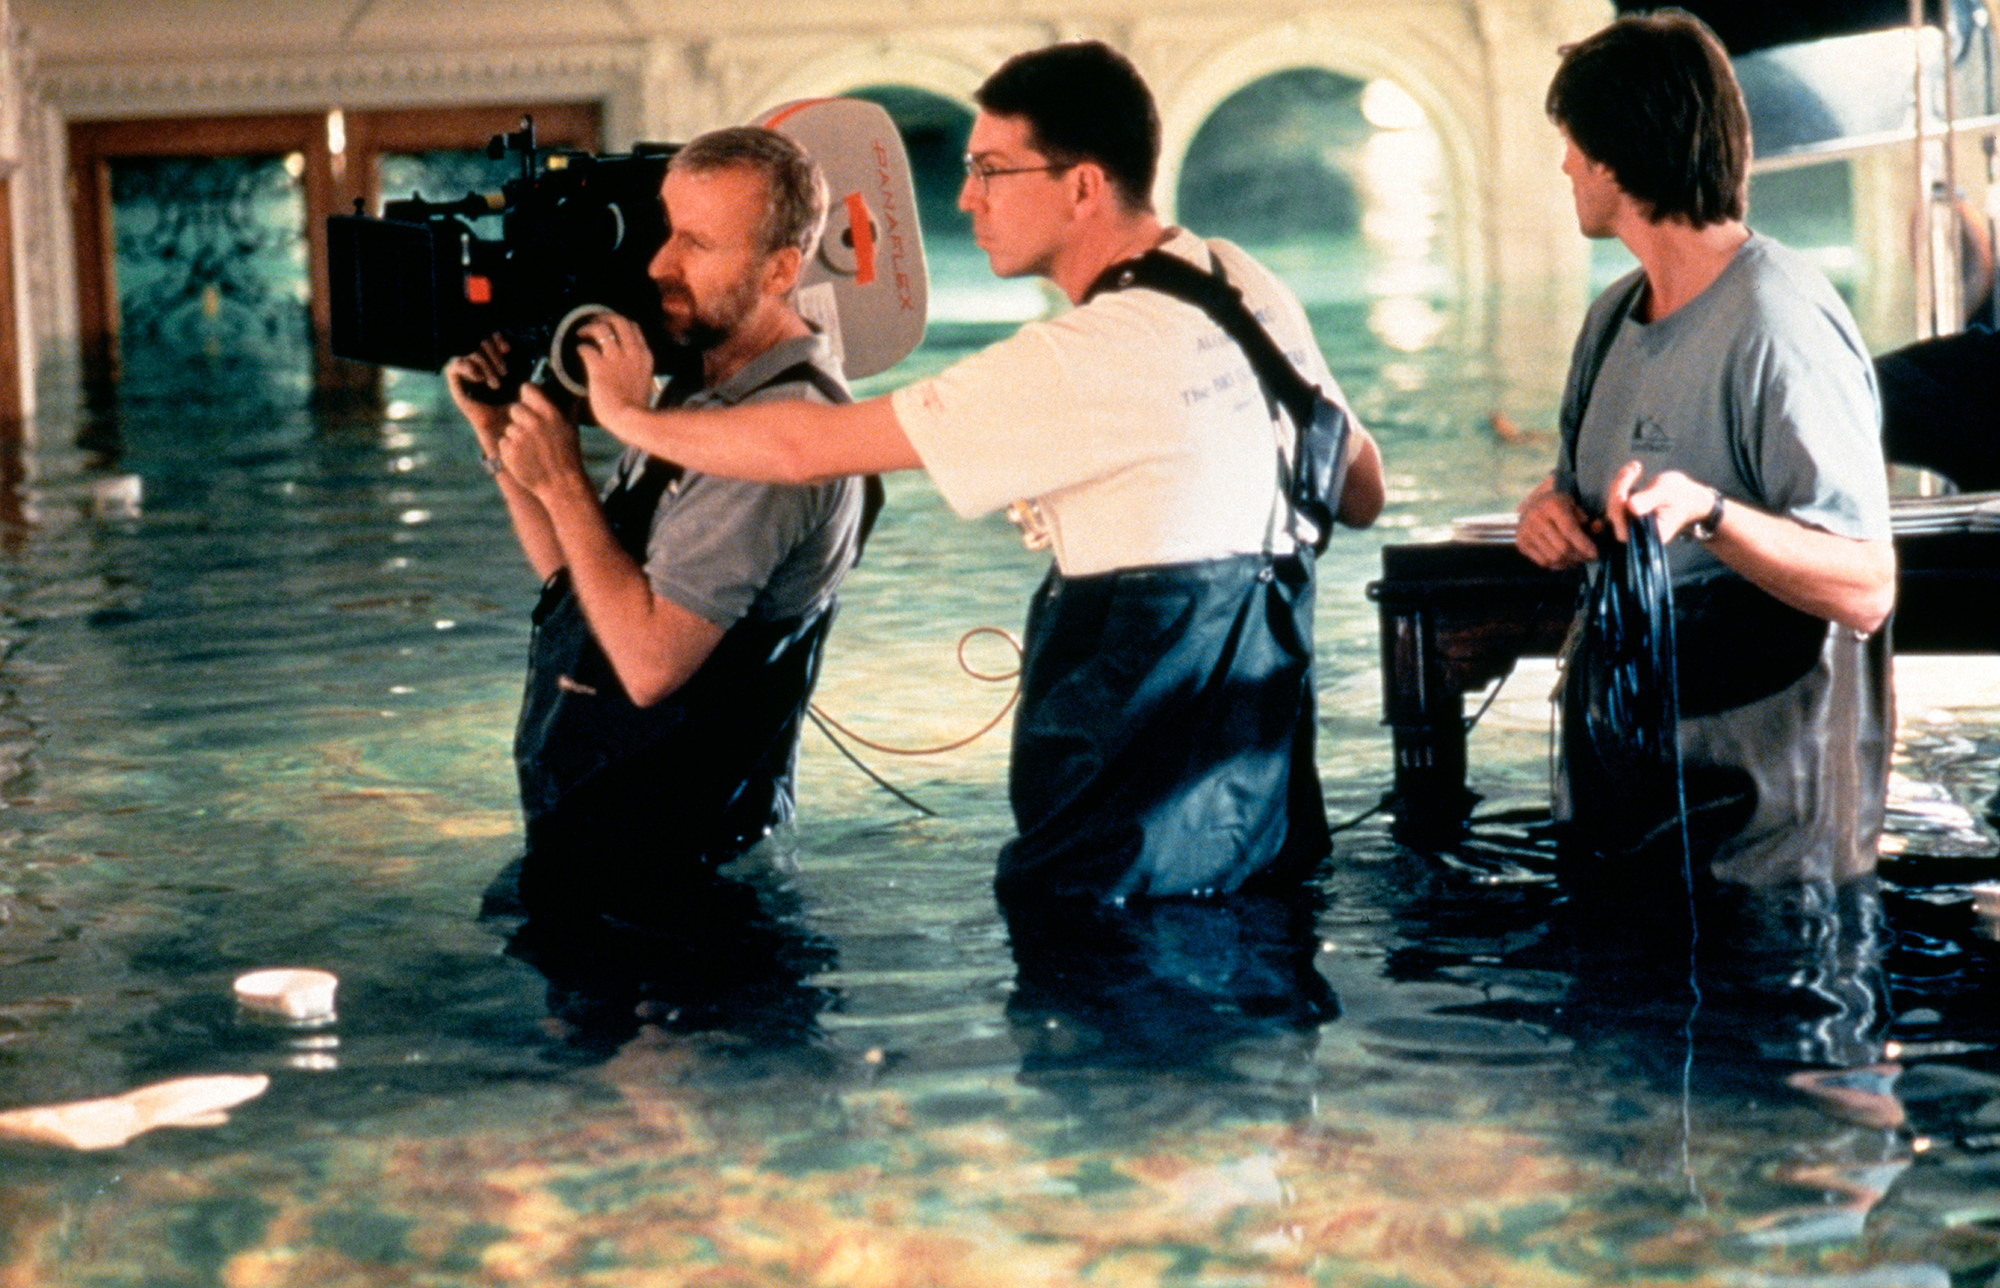 Cameron holding a large camera with crew in water during a flooding scene 